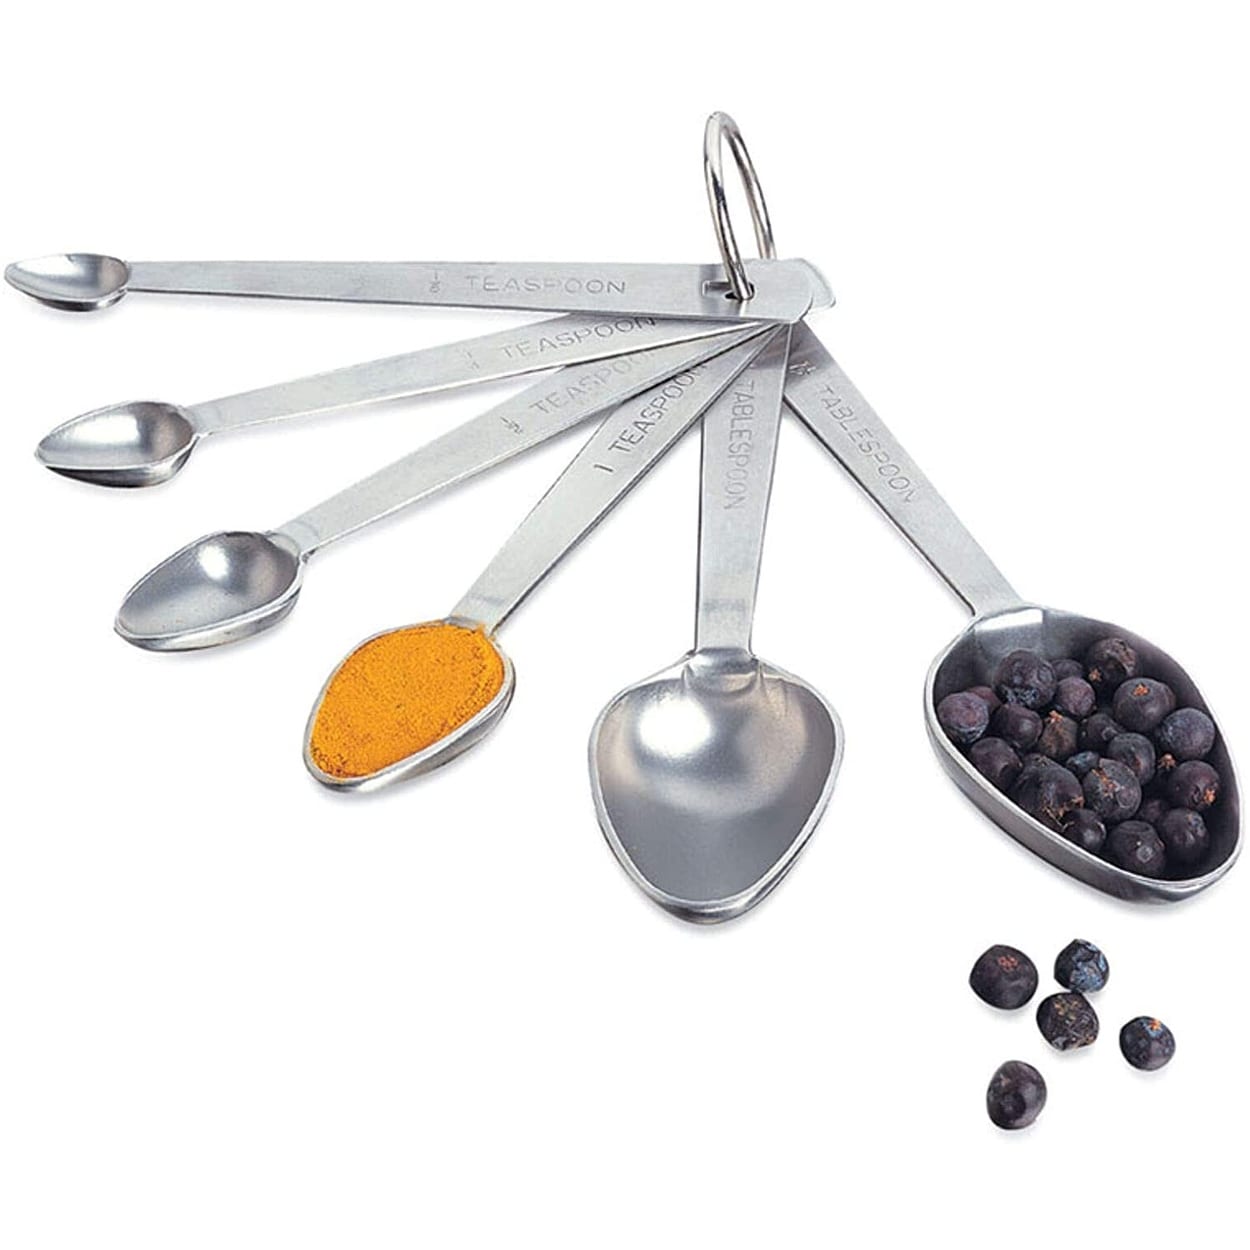 https://ak1.ostkcdn.com/images/products/is/images/direct/4c9862562c5e1da2a1fe6c6189d50945439cf426/Amco-Professional-Performance-Measuring-Spoons%2C-Set-of-6.jpg